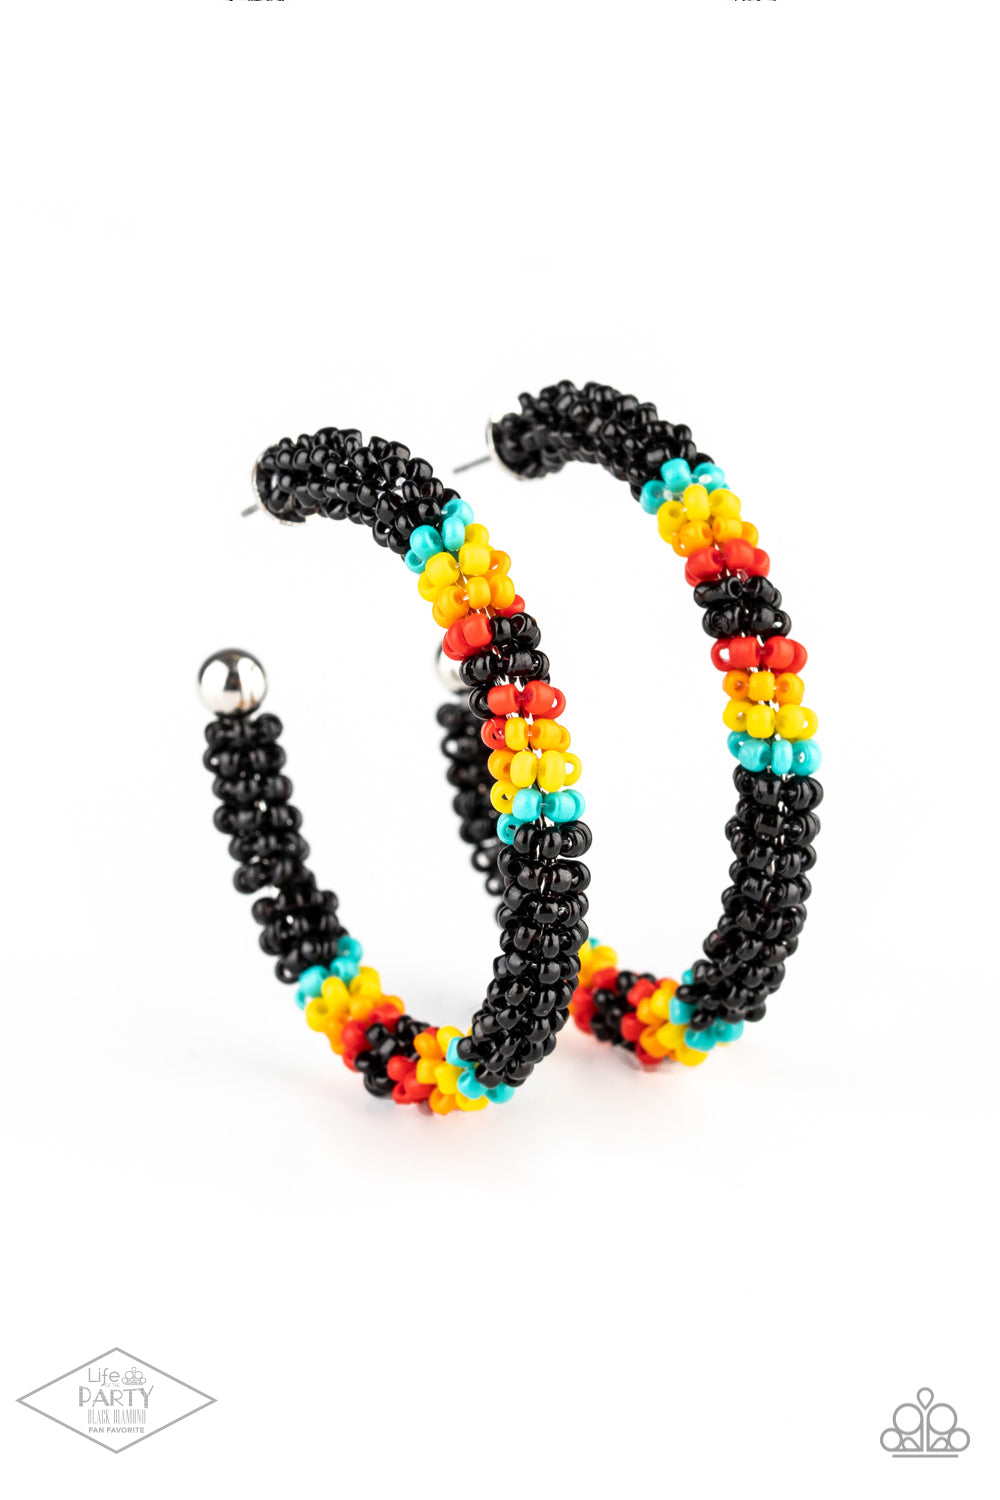 Paparazzi Accessories Bodaciously Beaded - Black Seedbead Hoop Earrings aolorful strand of black, blue, yellow, orange, and red seed beads wraps around a shiny silver hoop, creating a colorfully seasonal look. Earring attaches to a standard post fitting. Hoop measures approximately 2" in diameter.  Sold as one pair of hoop earrings.  Paparazzi Jewelry is lead and nickel free so it's perfect for sensitive skin too!